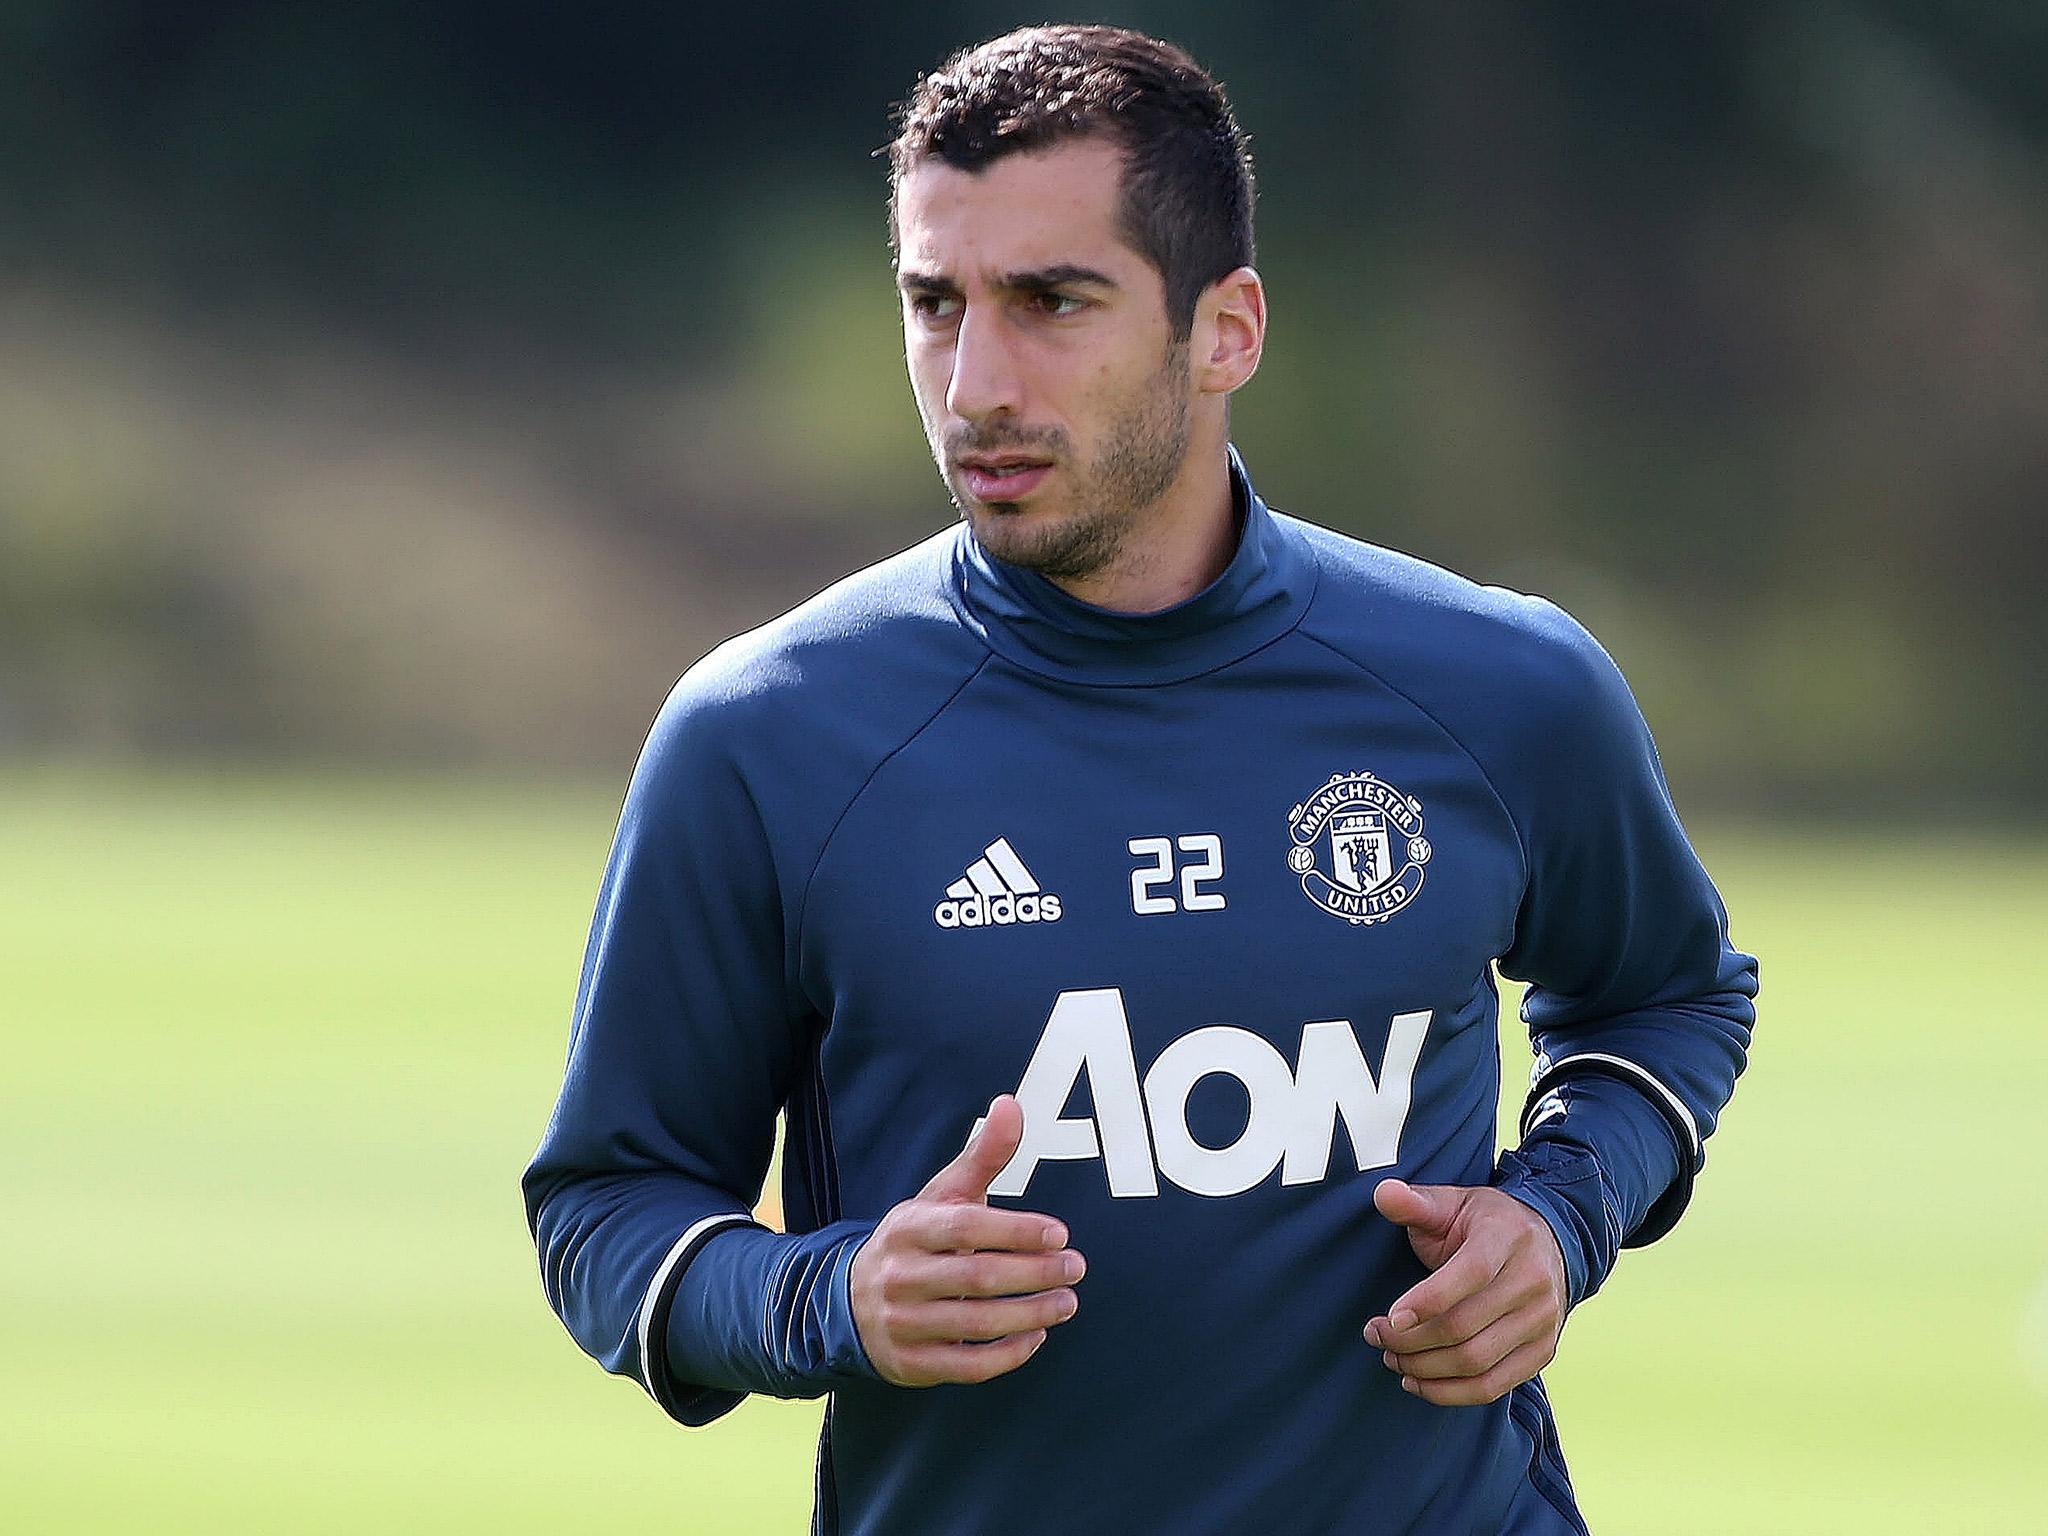 Mkhitaryan has only made six appearances for United this season following his summer move from Dortmund.